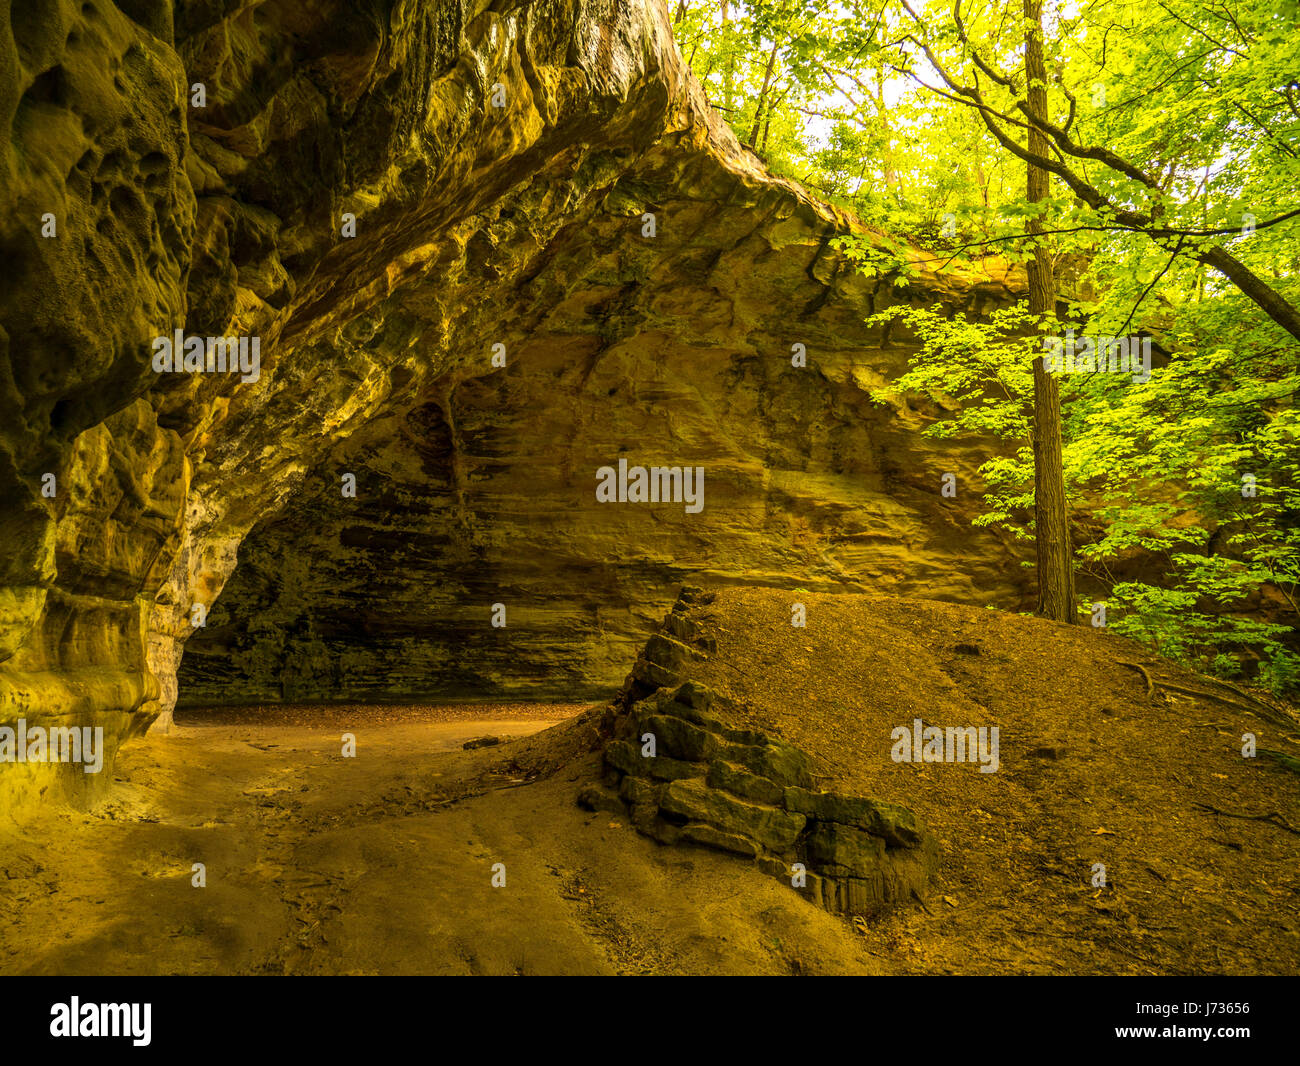 Council Overhang. Starved Rock State Park, Illinois. Stock Photo